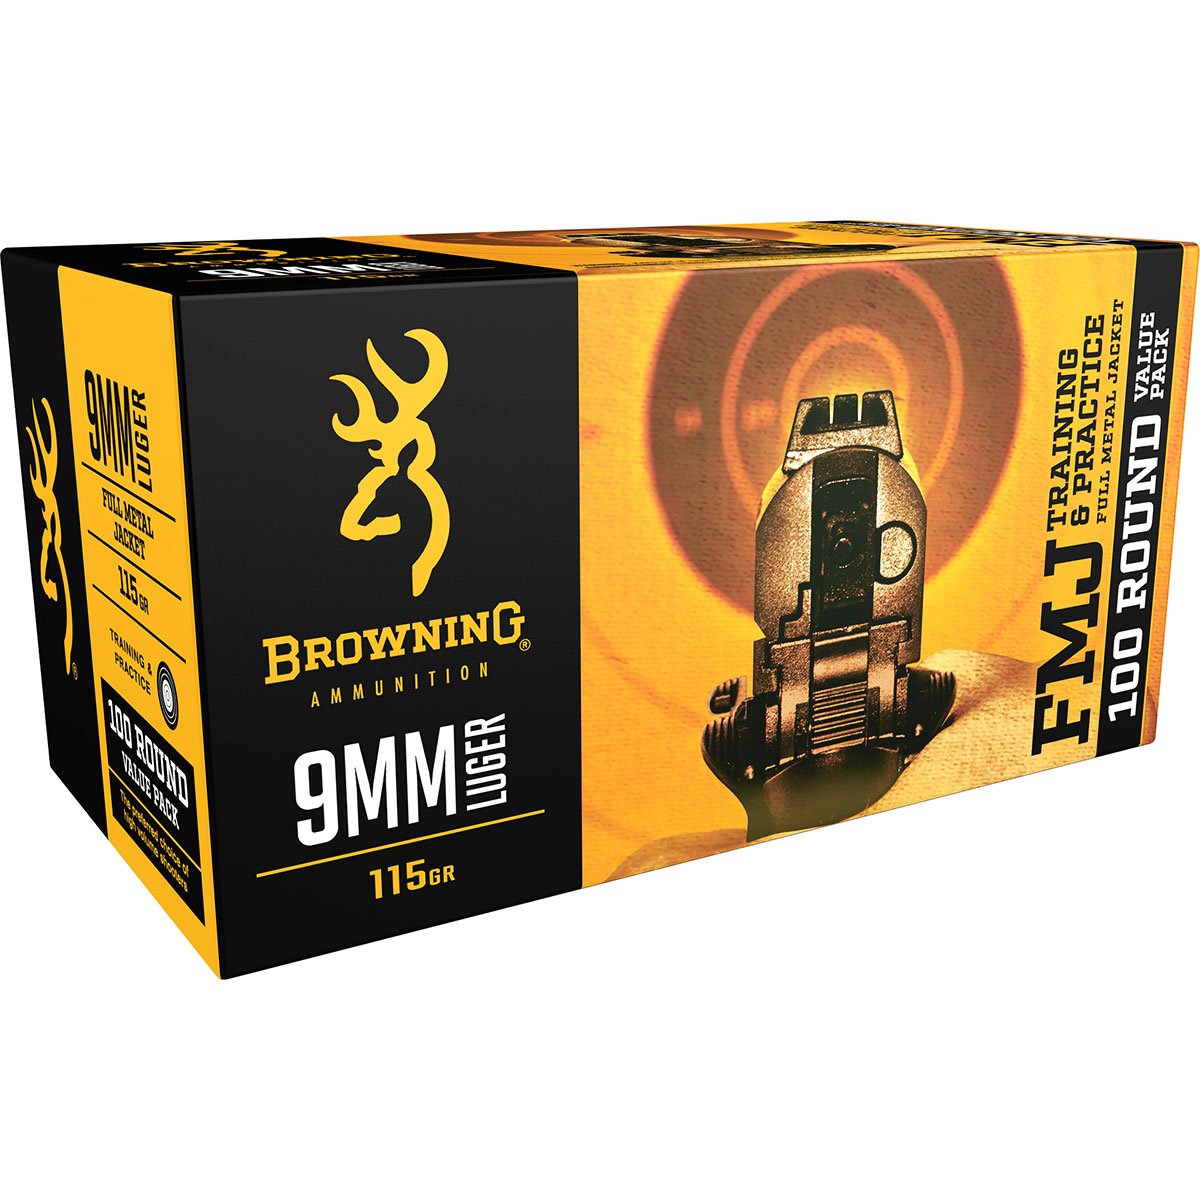 BROWNING AMMUNITION - TRAINING & PRACTICE 9MM LUGER AMMO